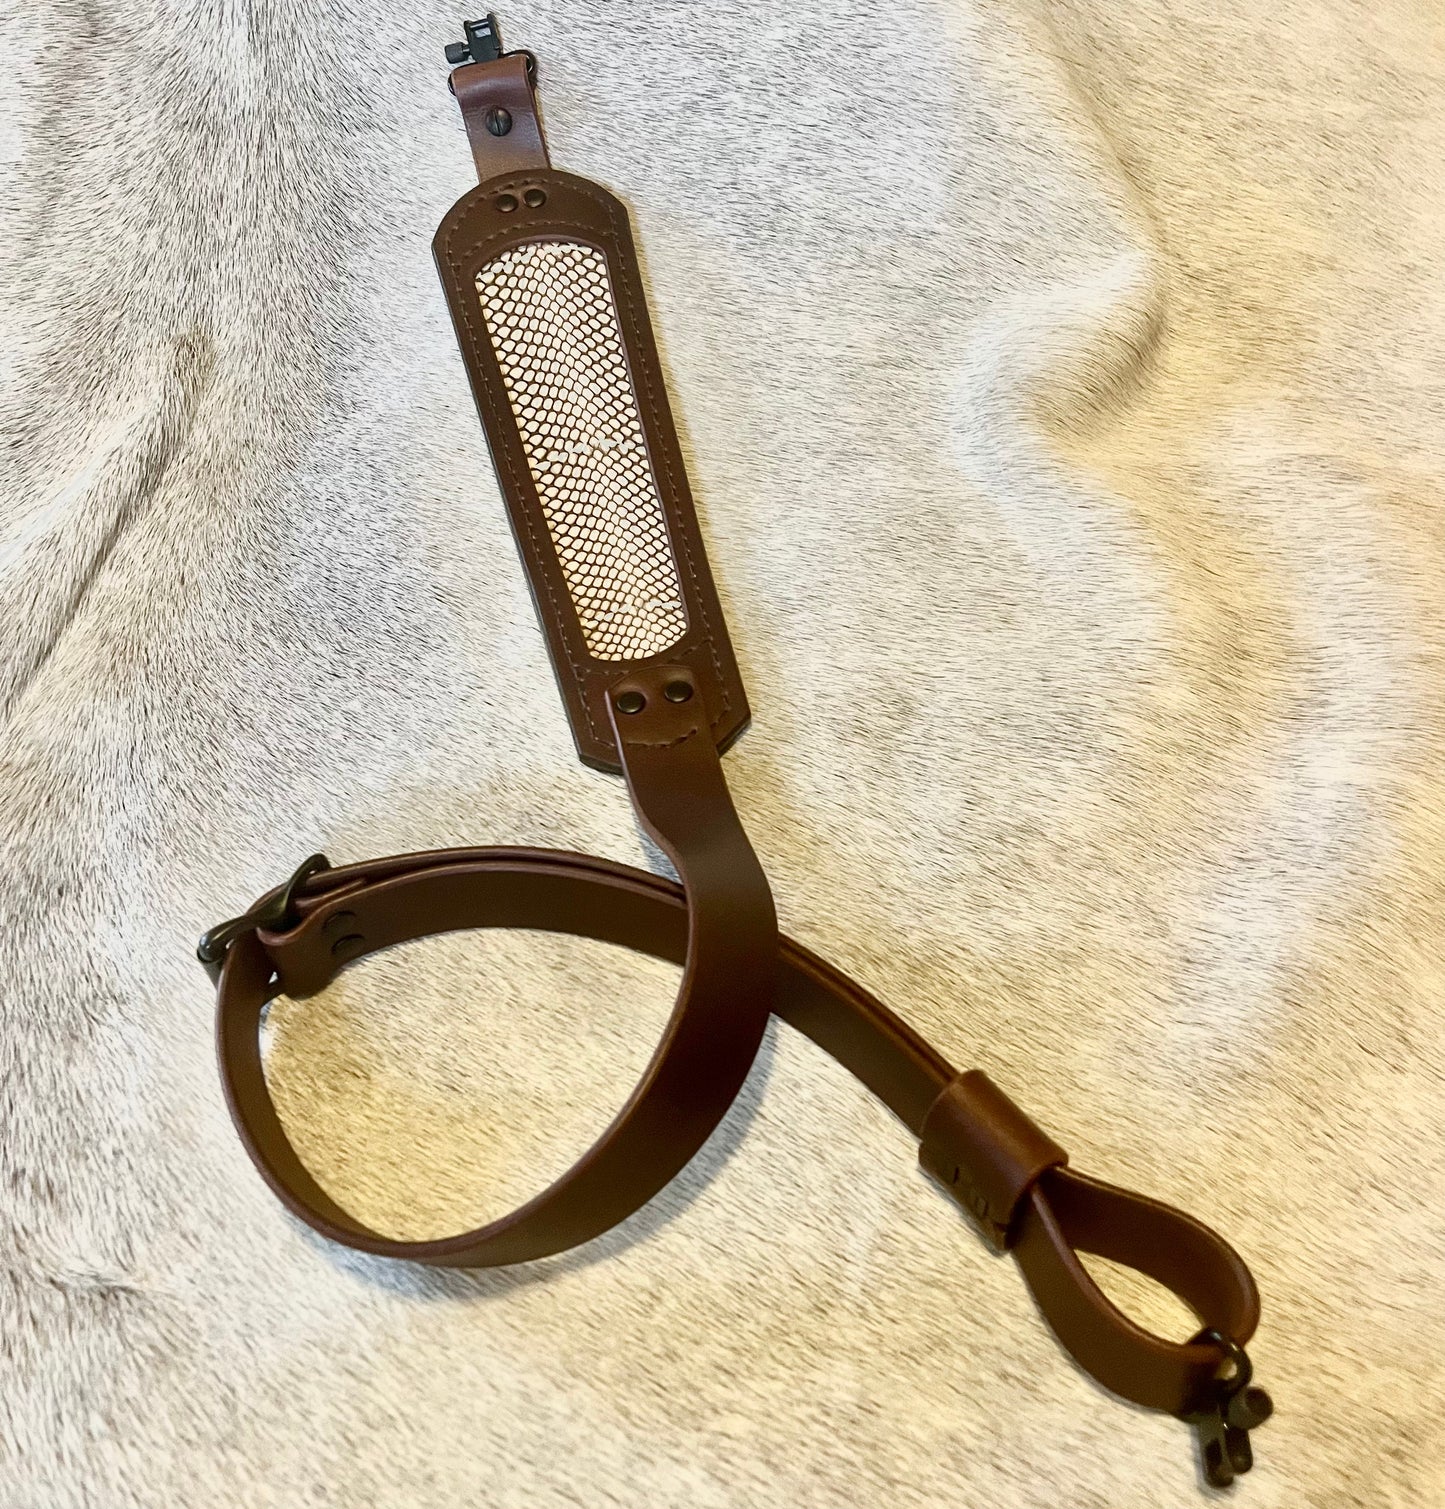 Cobra Style Buffalo Leather Gun Sling With Asian Cobra Leather Inlay